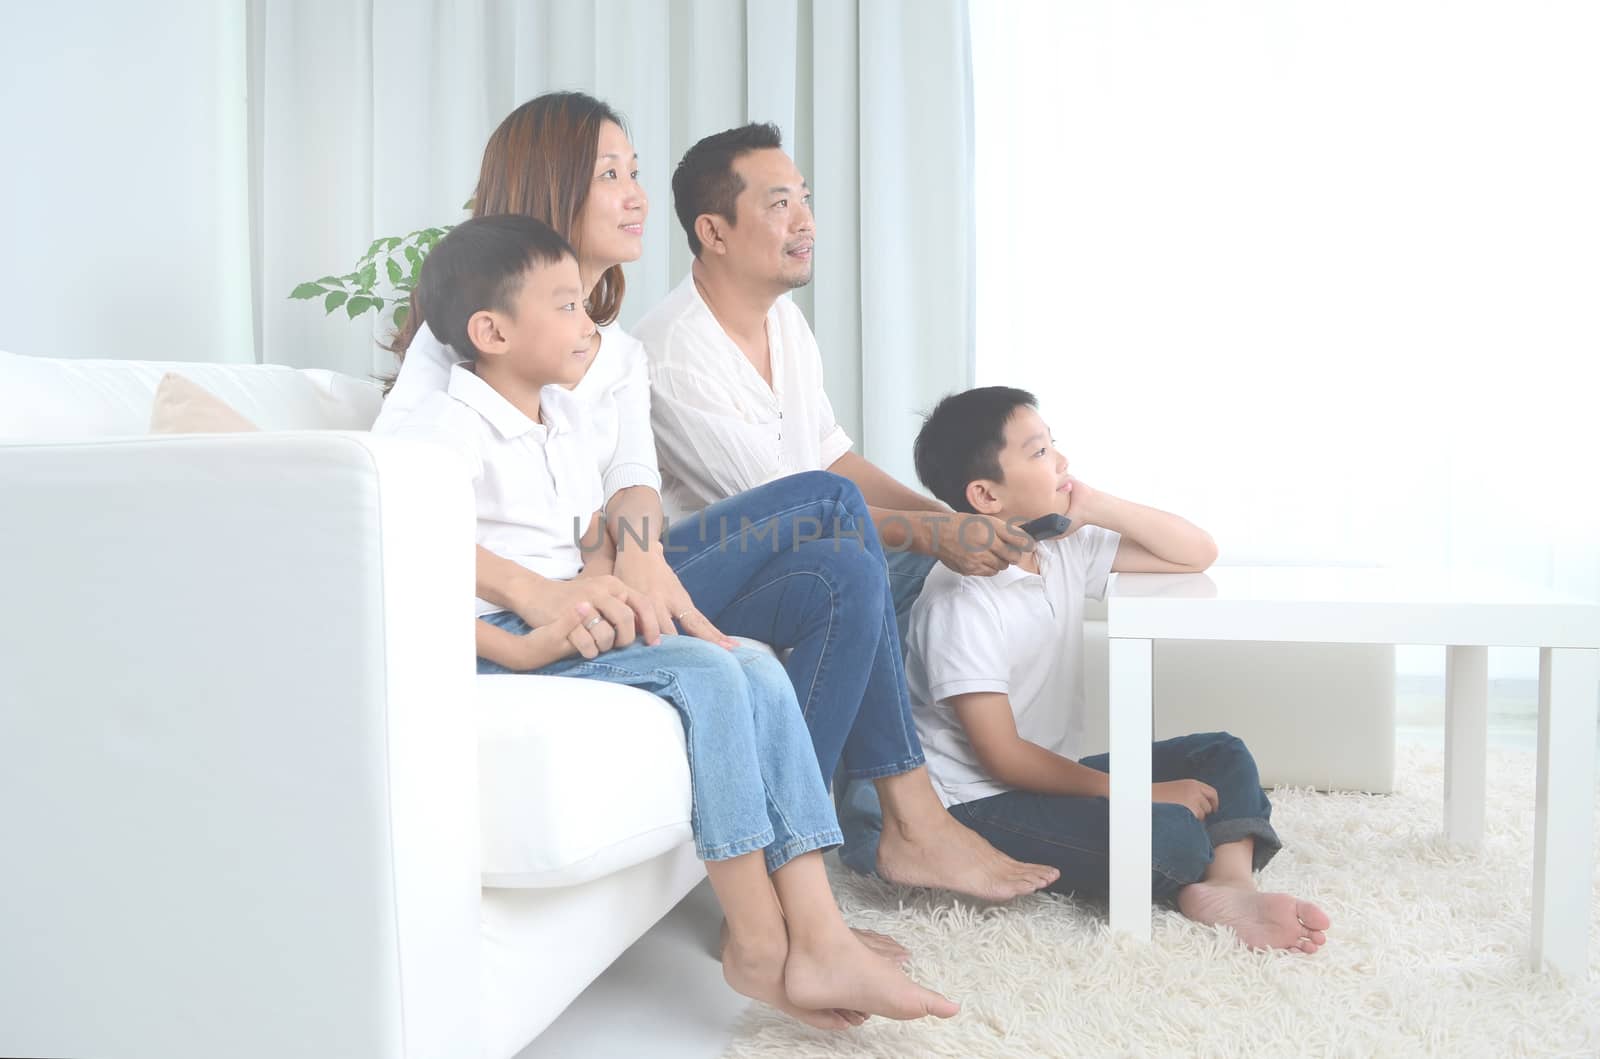 Asian happy family sitting and watching television at home.  Social Distancing, stay at home, holiday or lifestyle concept.